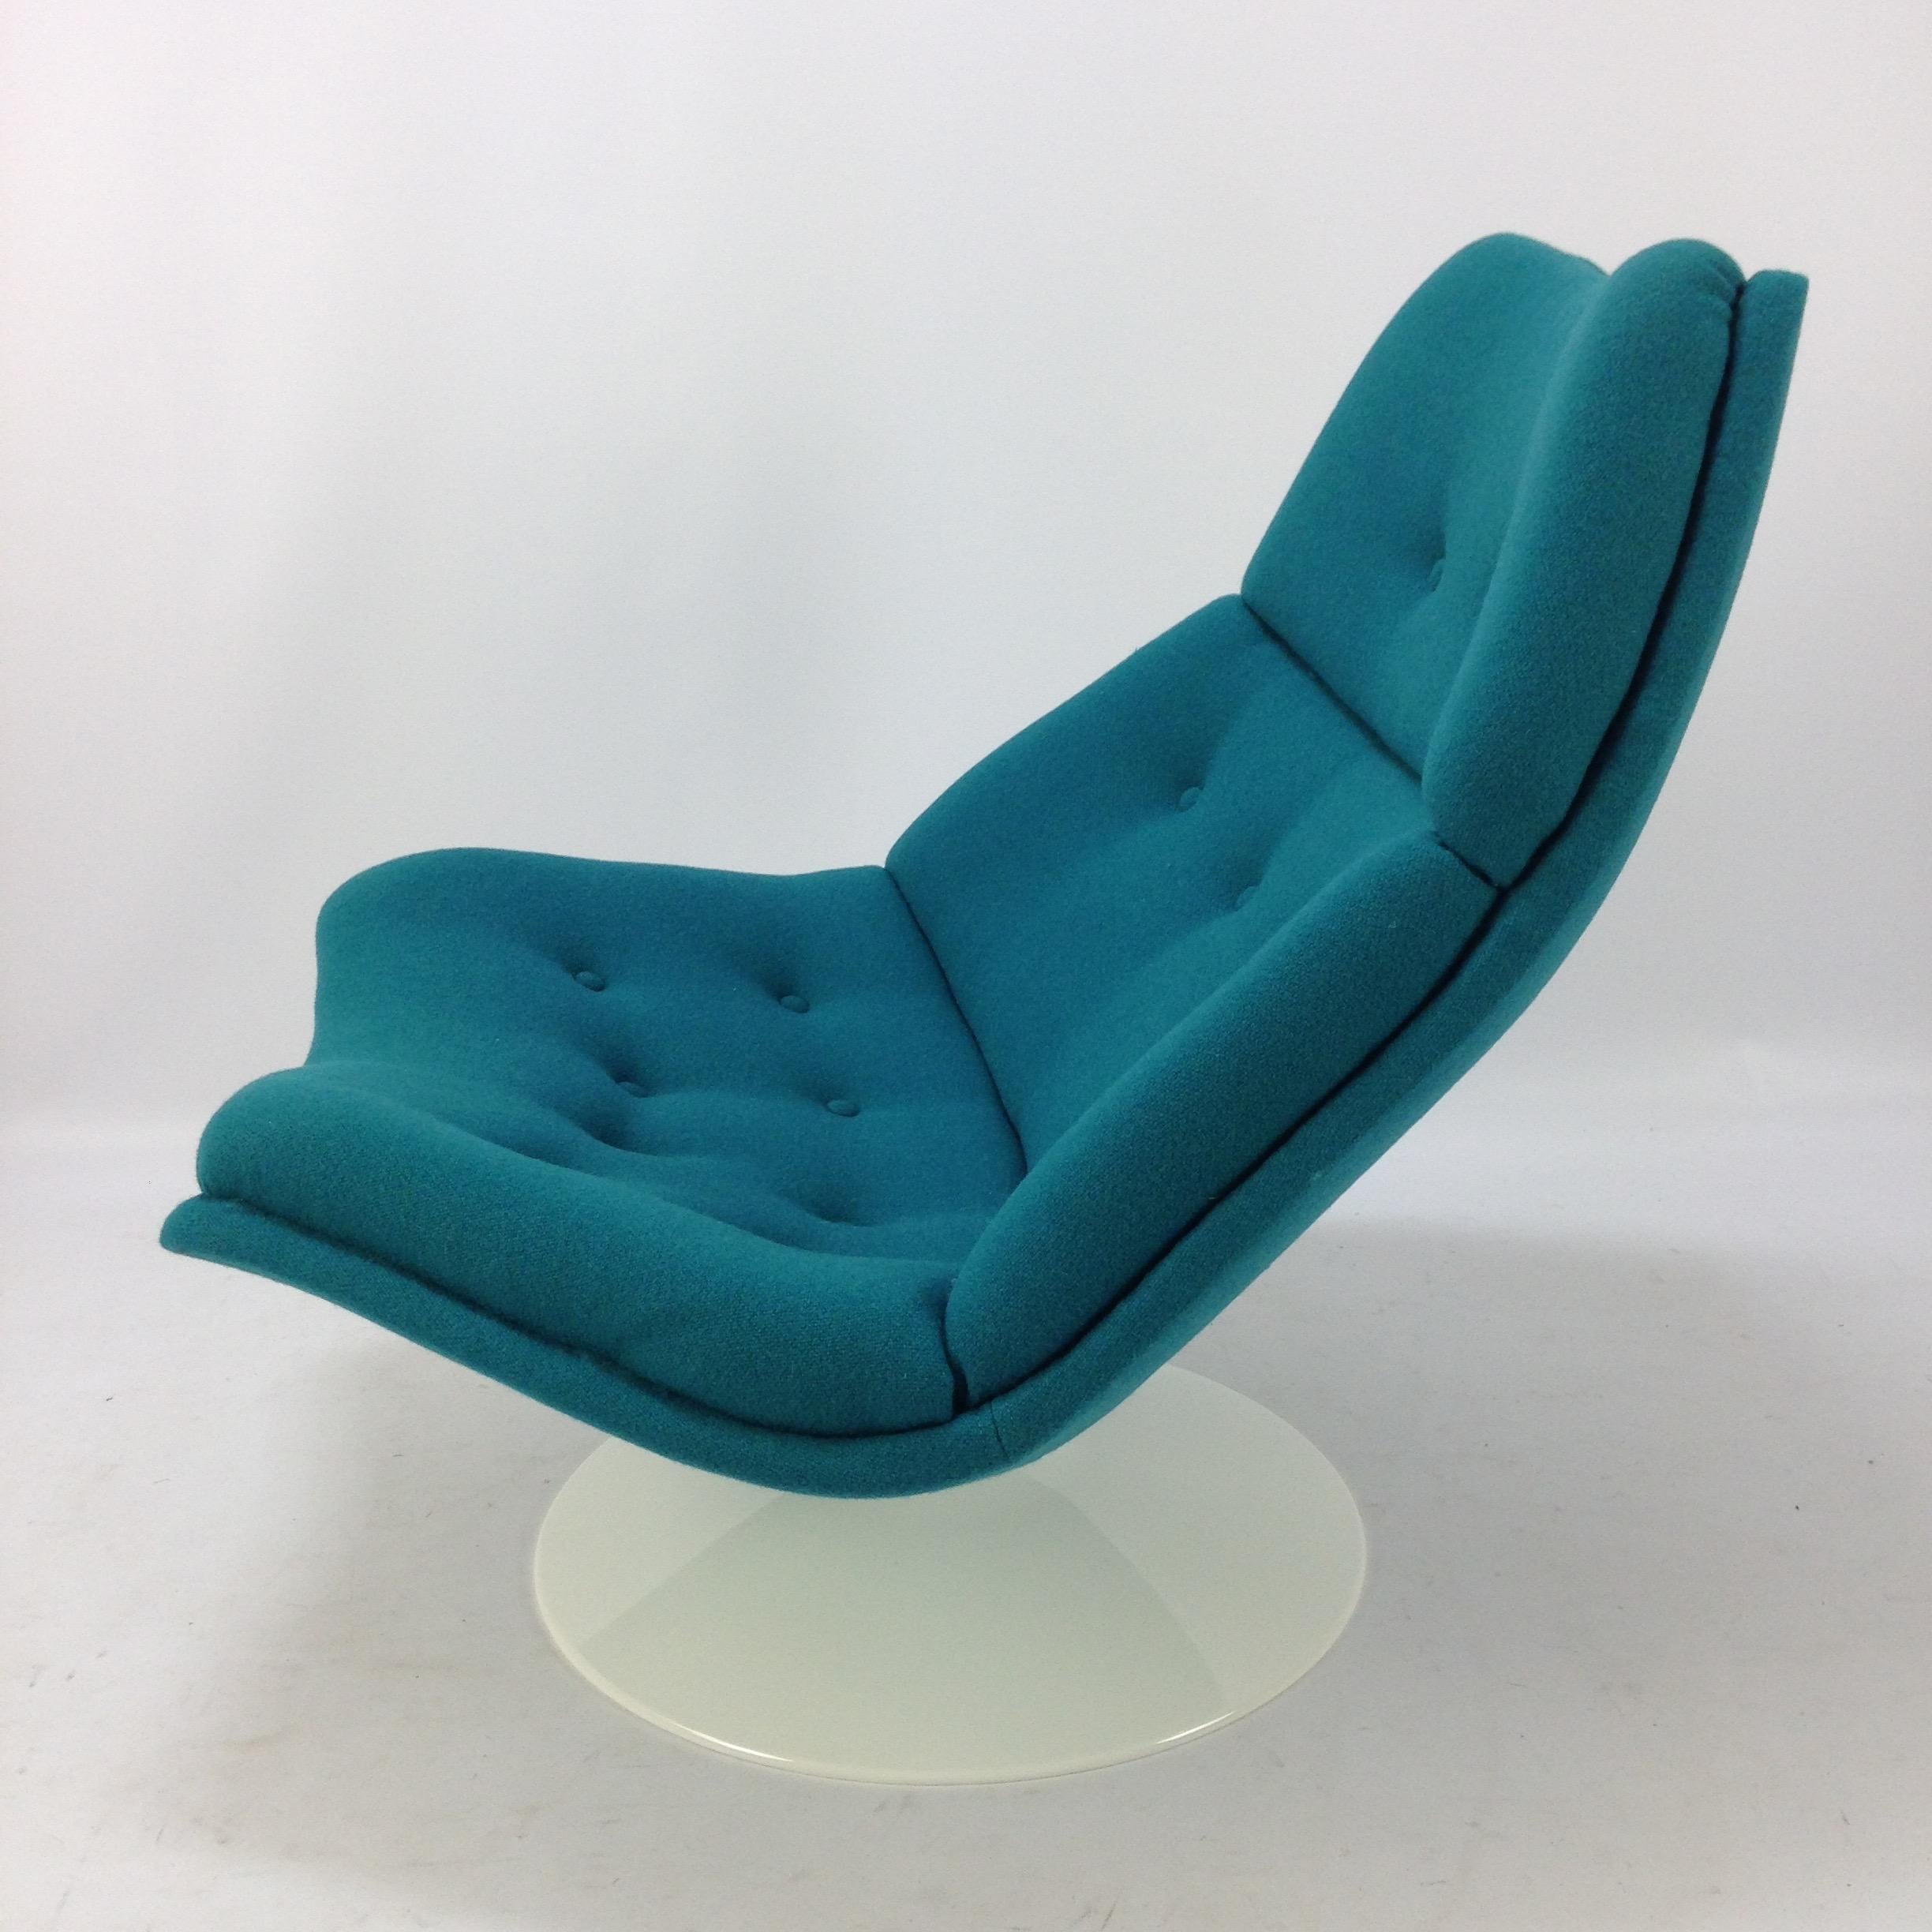 Painted Model F511 Lounge Chair by Geoffrey Harcourt for Artifort, 1960s